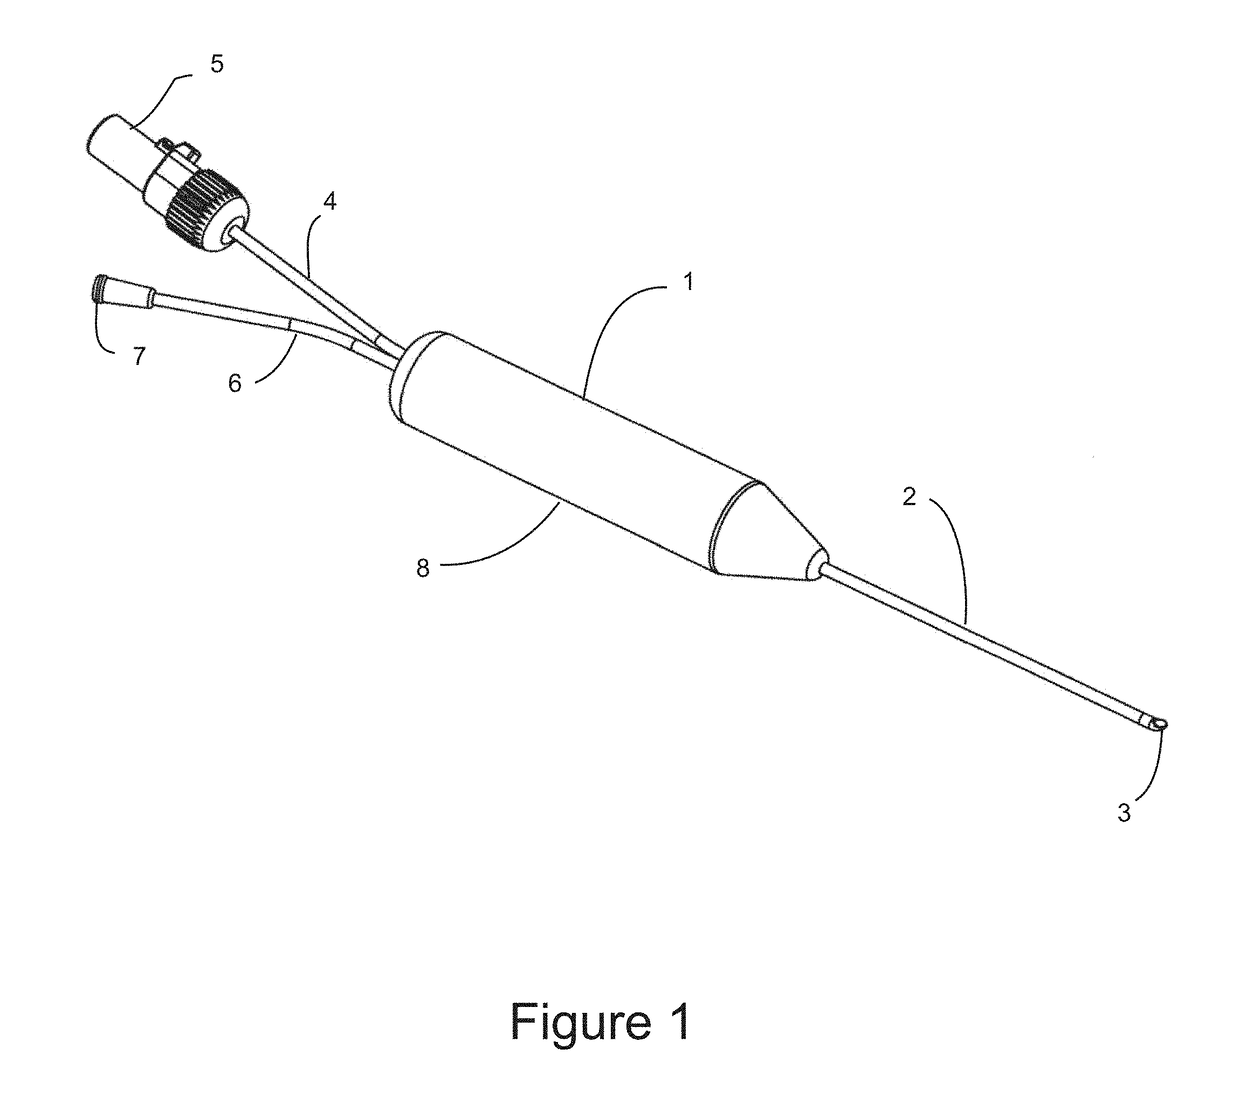 Direct Vision Cryosurgical Probe and Methods of Use